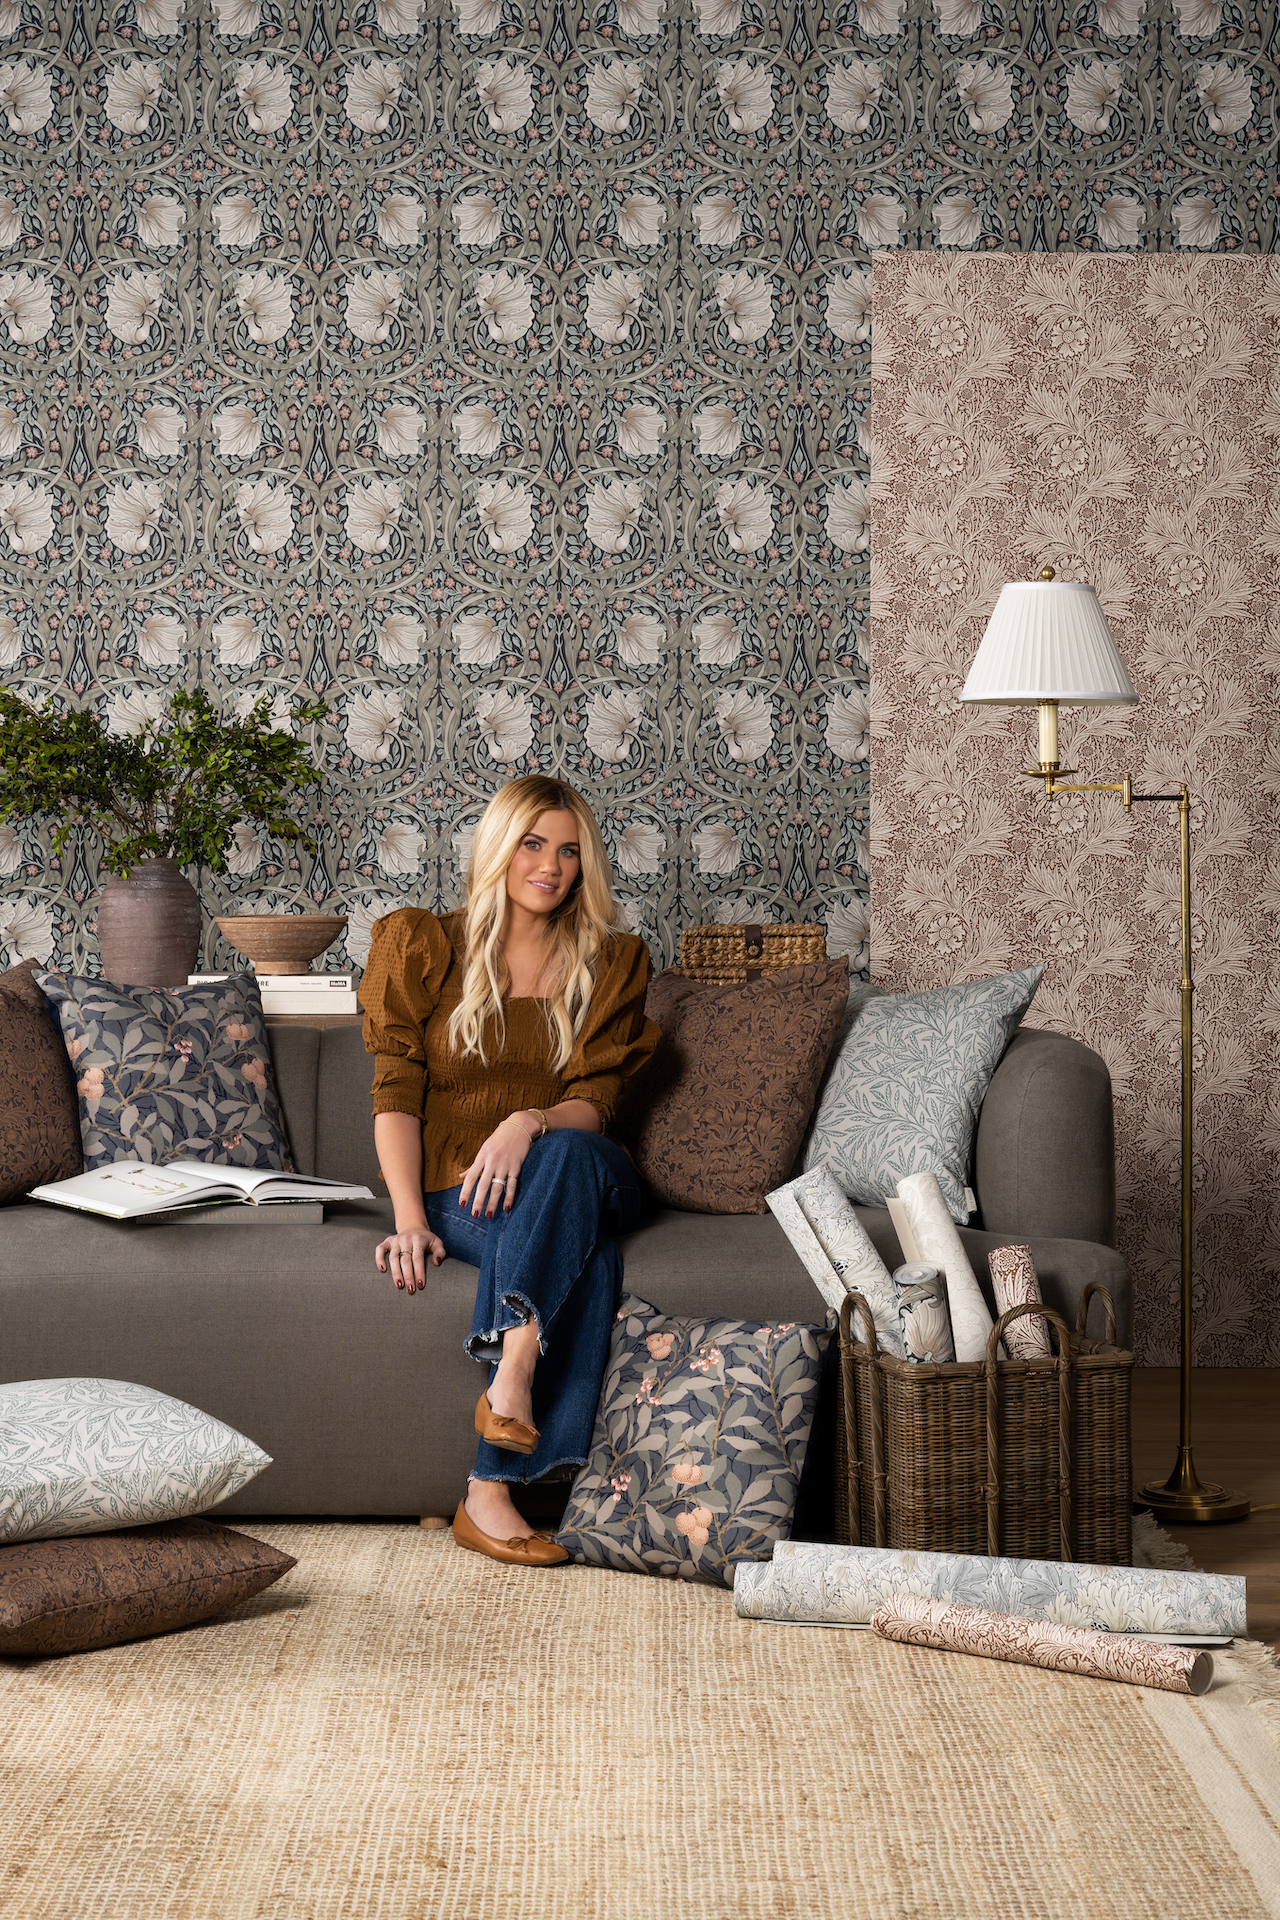 Shea sitting on sofa with Morris & Co. x McGee & Co. wallpaper and pillows